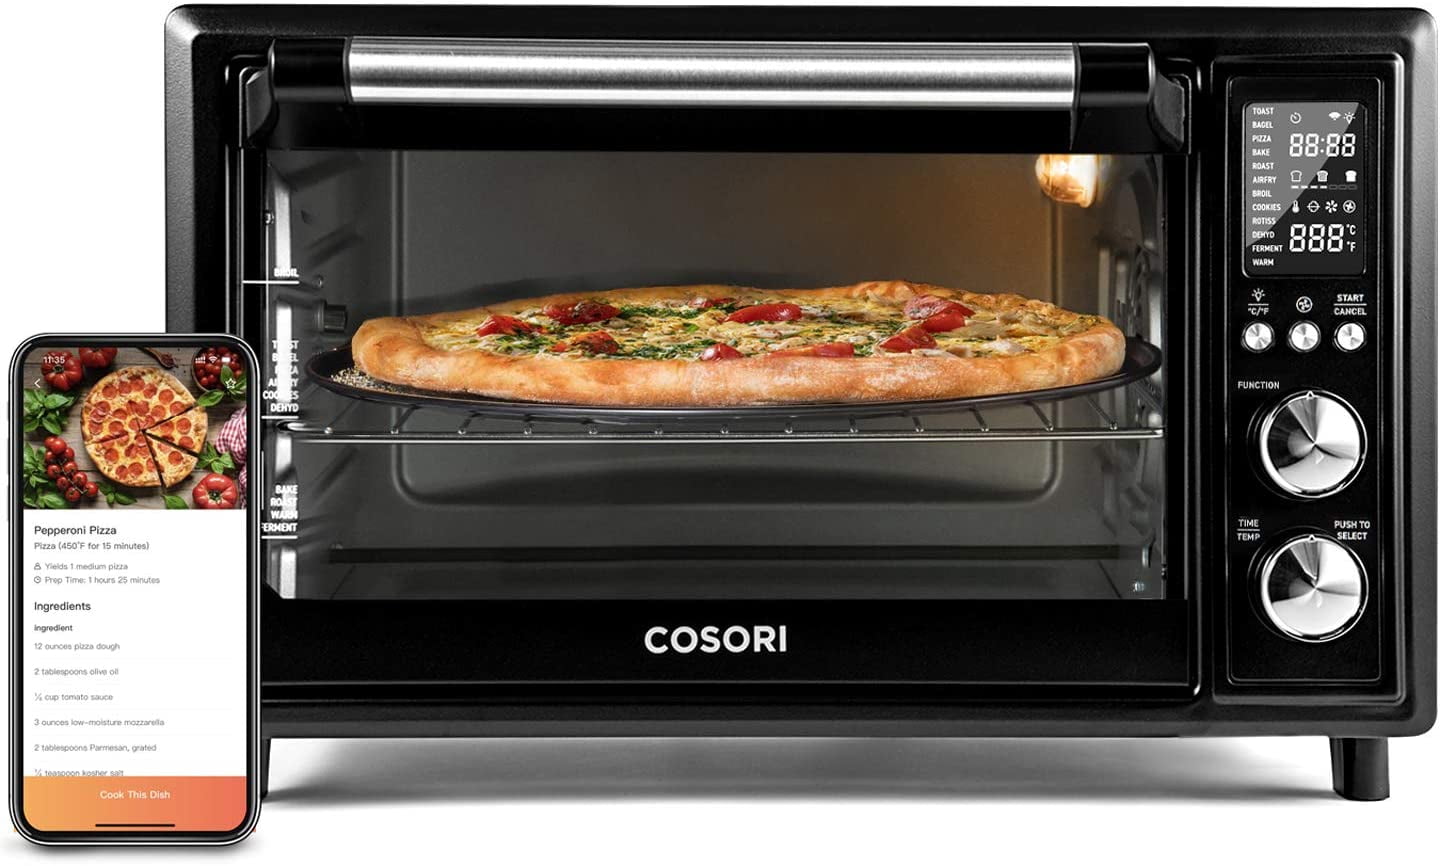 Cosori Toaster Oven Air Fryer, Smart 32QT Large Stainless Steel Convection Oven for Pizza, Rotisserie, Black | Walmart Exclusive Bonus Wire Rack | CS130-AO-RXB